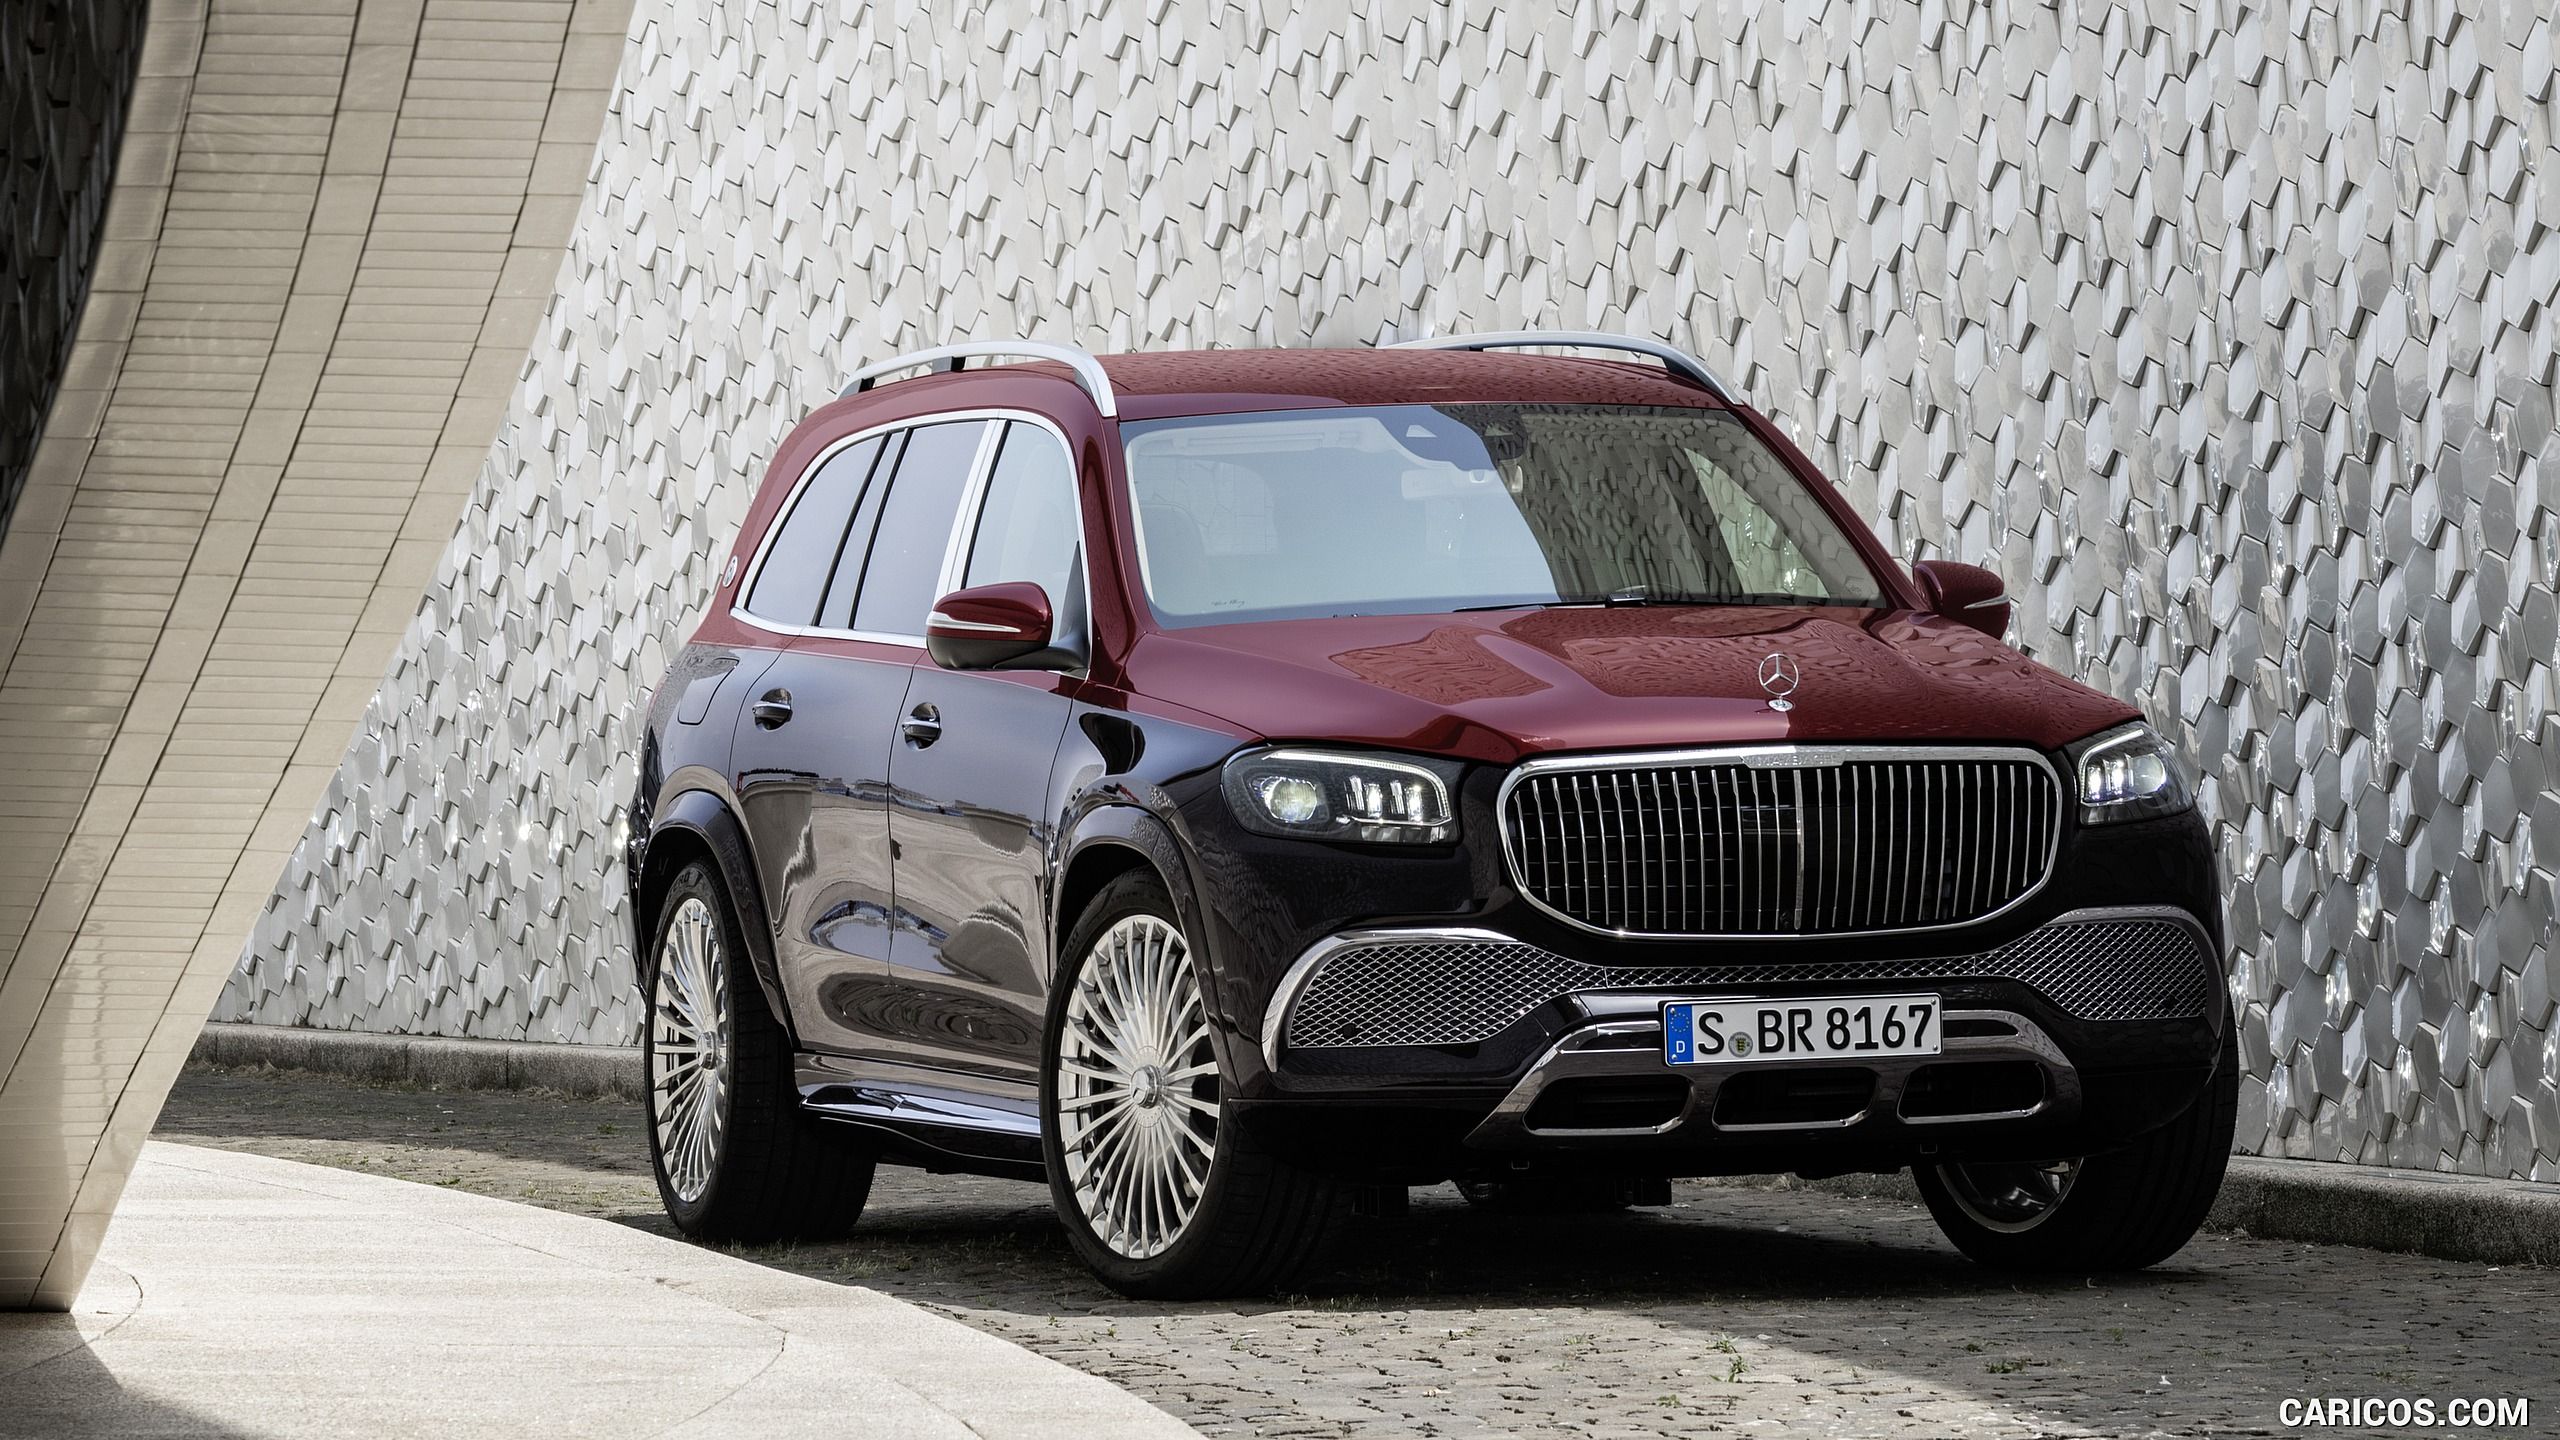 Mercedes Maybach GLS 600 (Color: Rubellite Red / Obsidian Black). HD Wallpaper